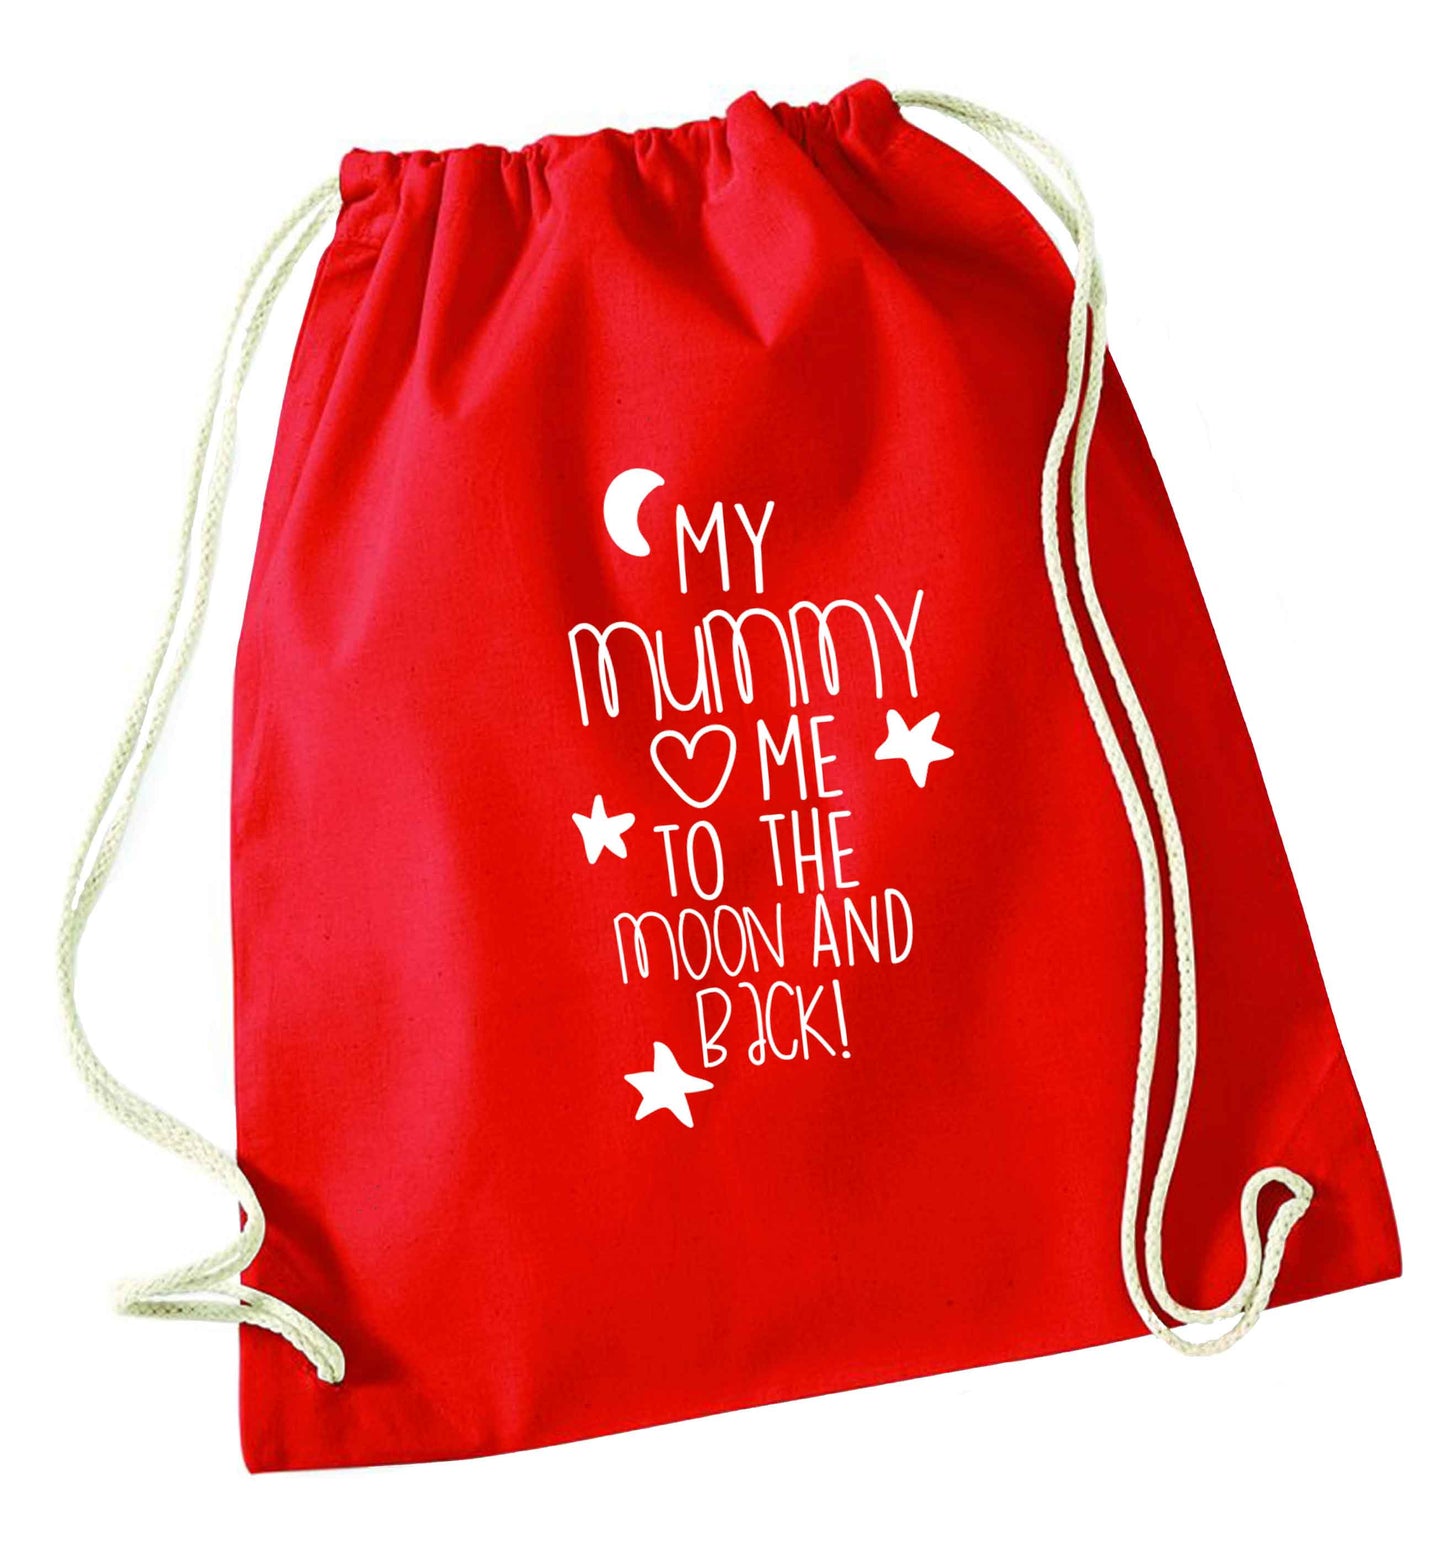 My mum loves me to the moon and back red drawstring bag 